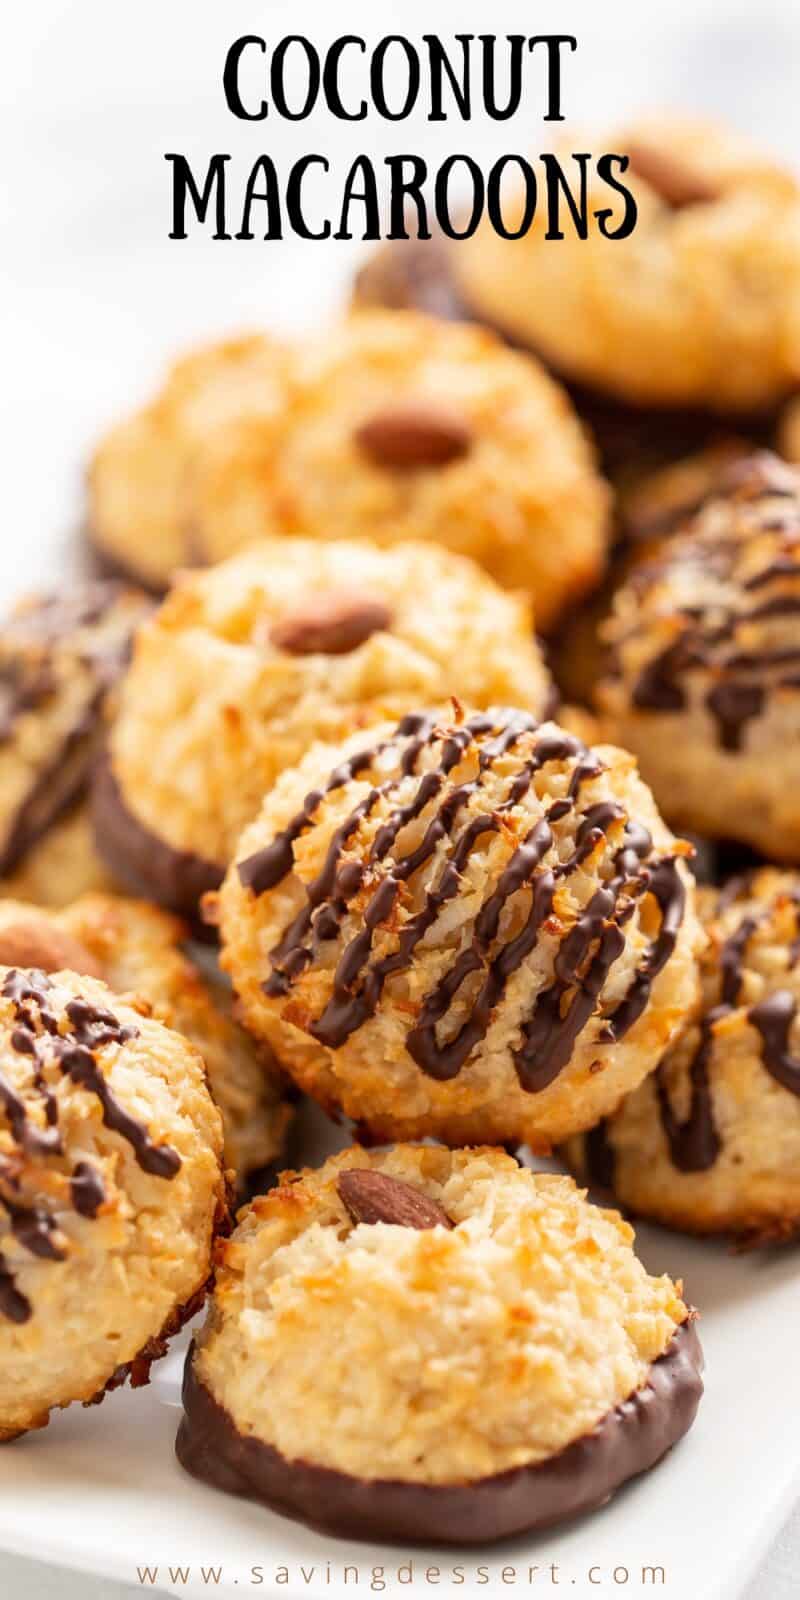 A platter of golden brown mounds of coconut macaroons